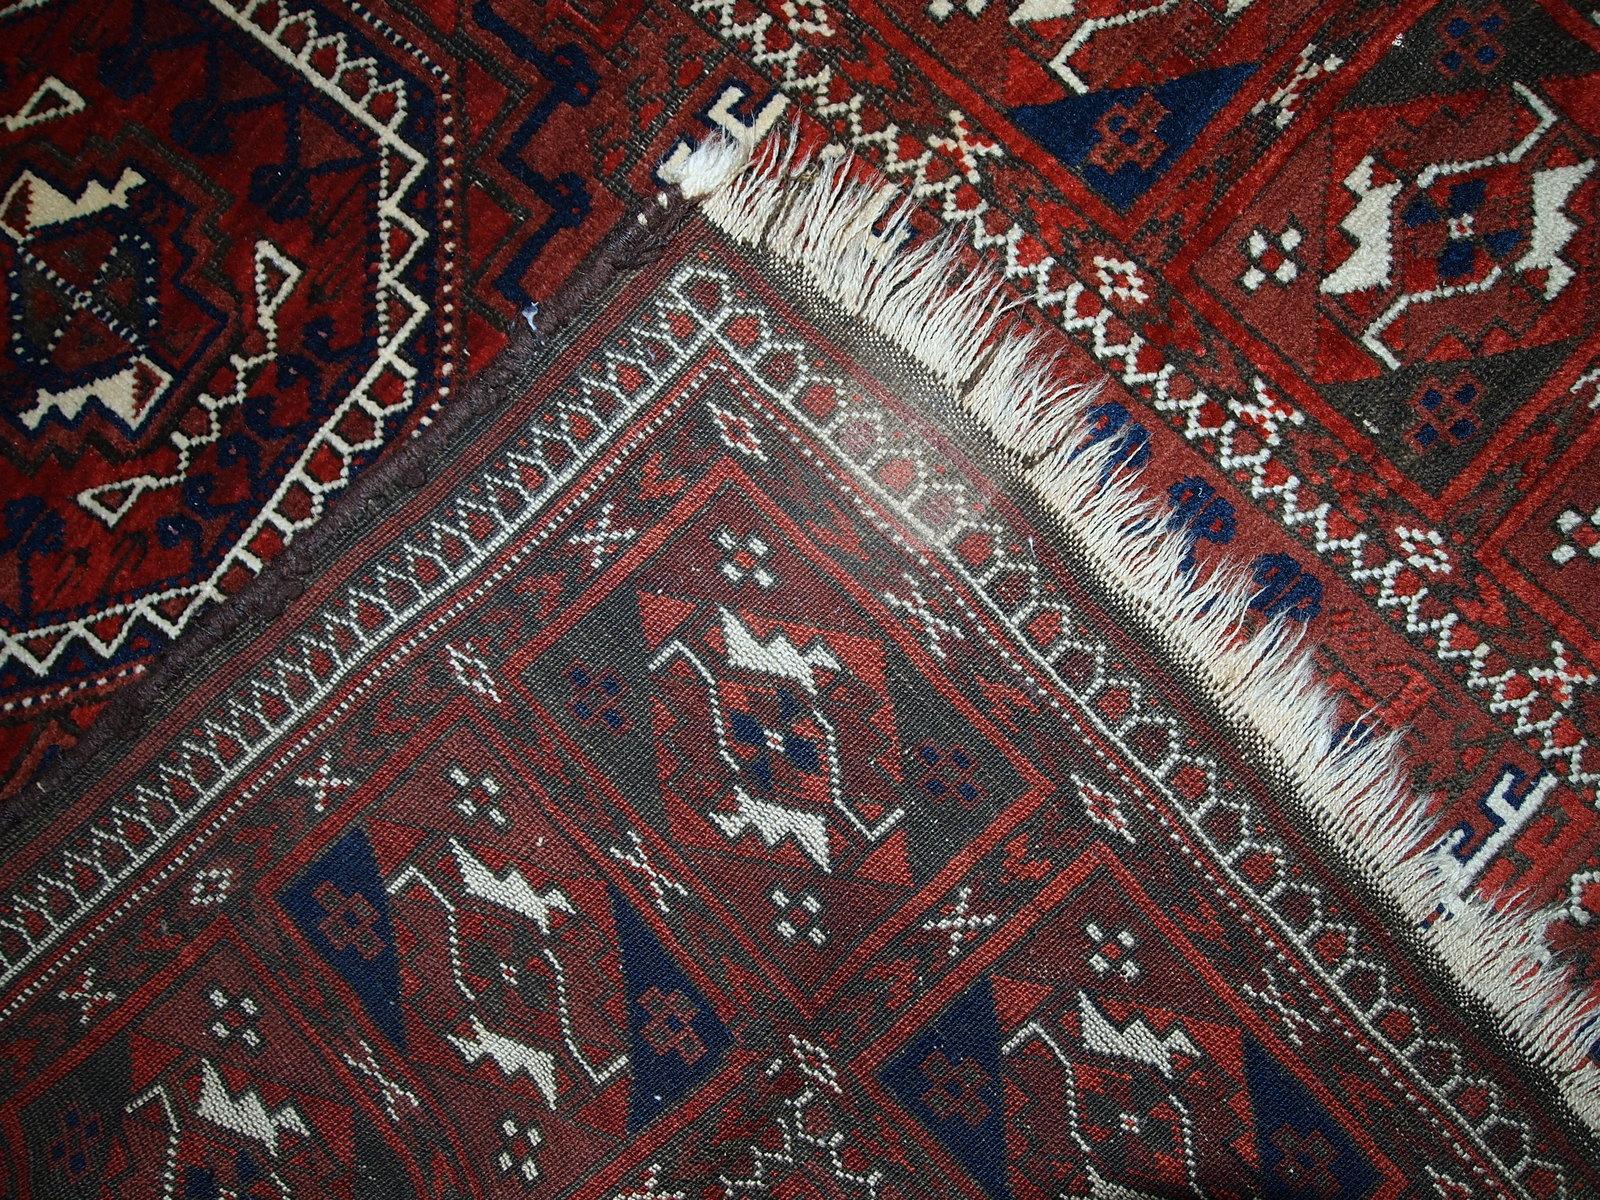 Antique hand made Afghan Baluch rug in original condition, has some age wear. The rug is in traditional deep burgundy shade with navy blue and white accents, has very rich combination of colors. 

-Condition: original, some age wear,

-Circa: